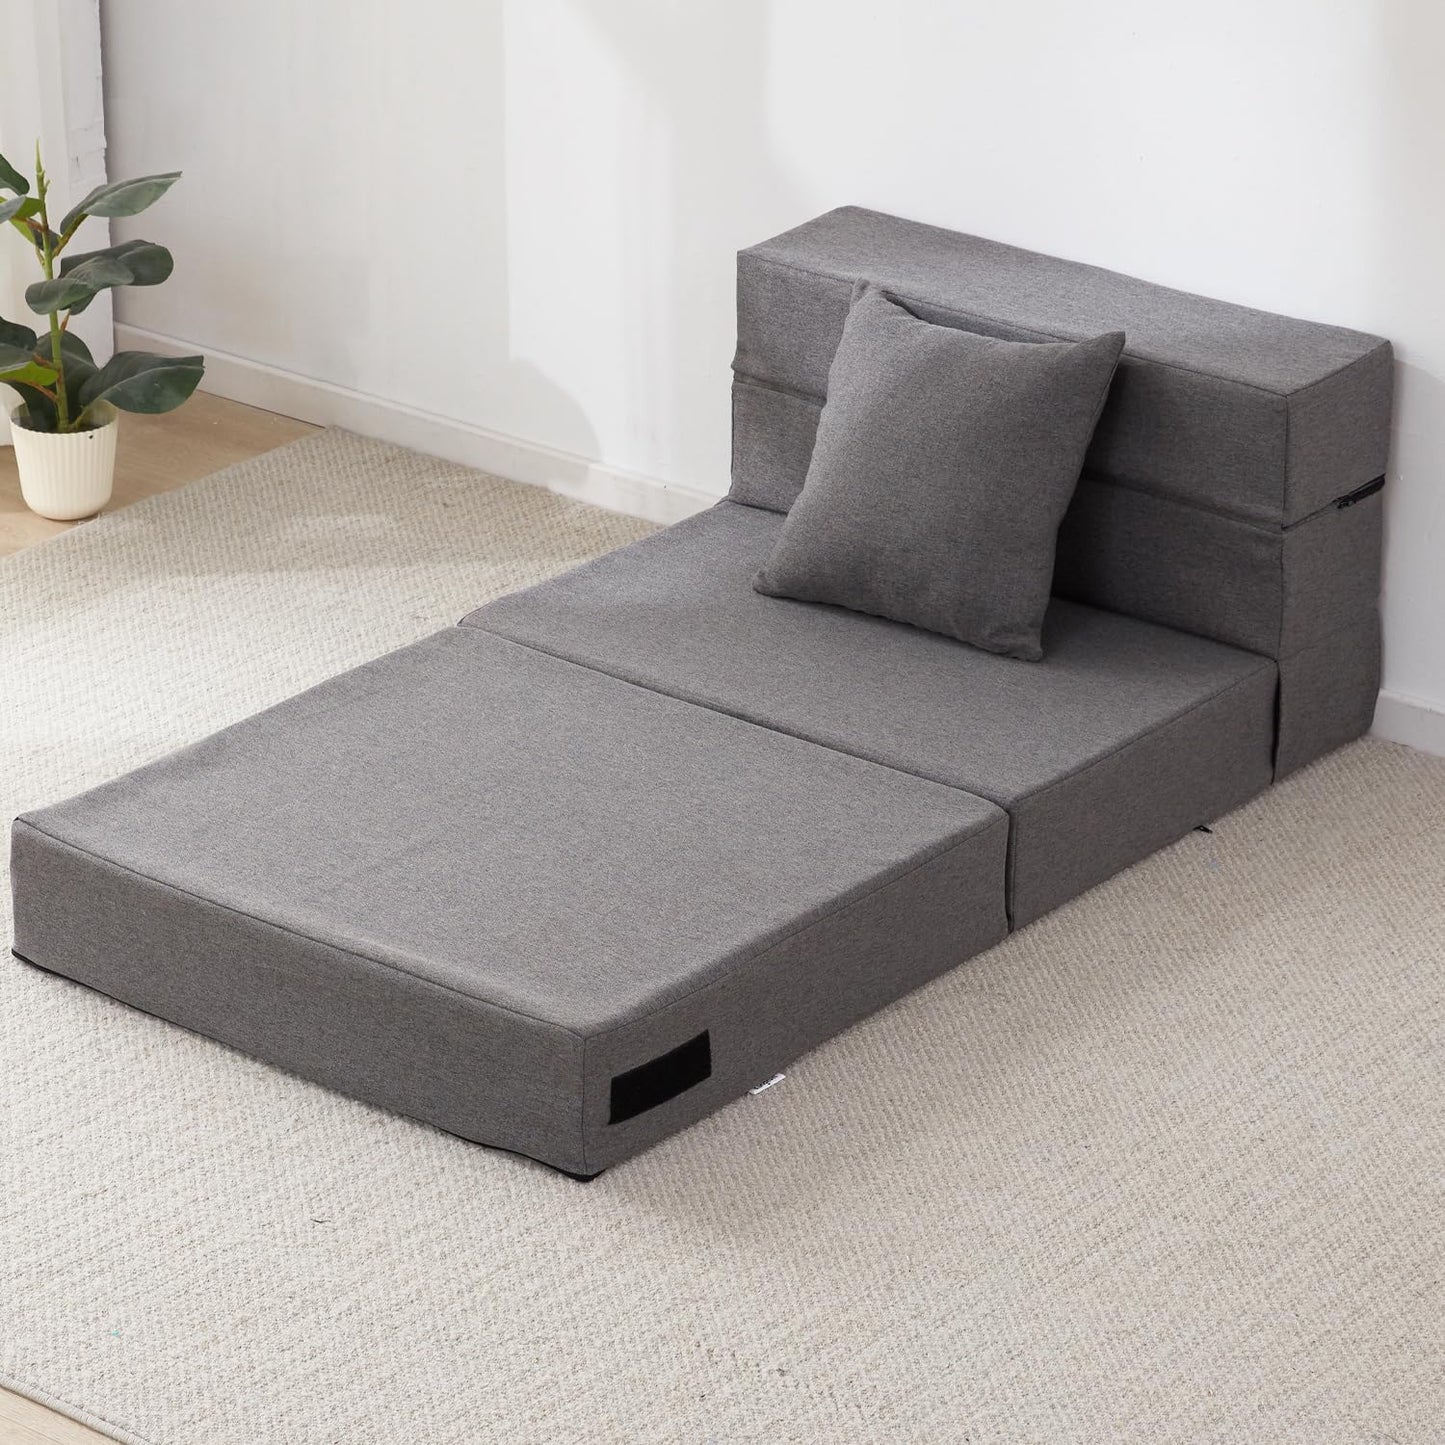 Memory Foam Sleeper Sofa Guest Bed and Chair Bed with Fold Out Design, Dark Grey, Washable Cover